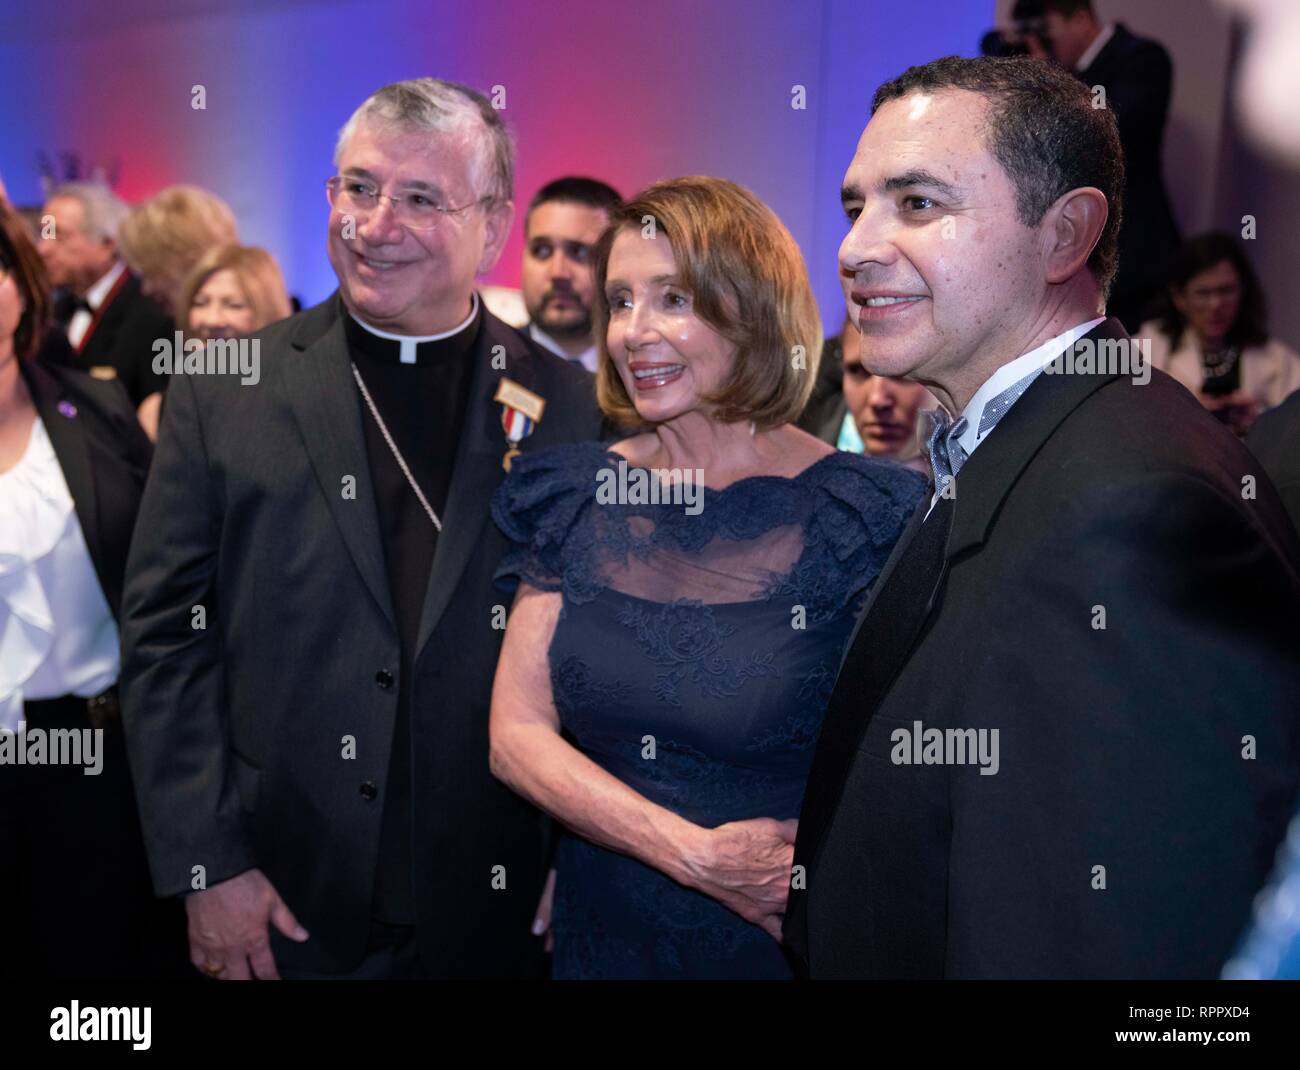 Speaker of the United States House of Representatives Nancy Pelosi poses at a cocktail party as an honored guest of the George Washington's Birthday celebration in the border city of Laredo, Texas. At right is U.S, Congressman Henry Cuellar, D-Laredo. Stock Photo